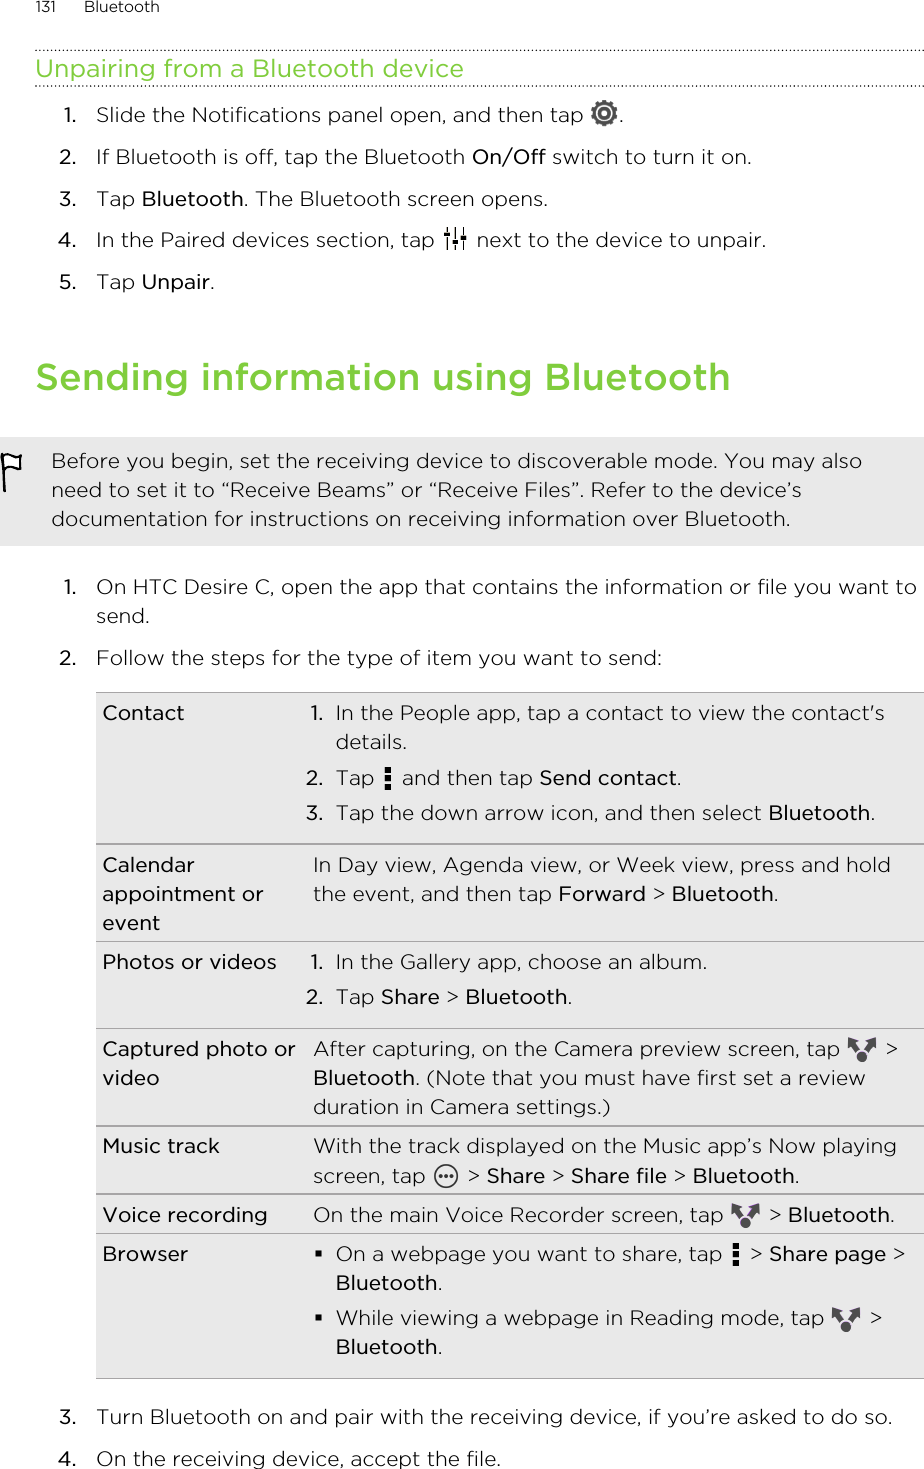 Unpairing from a Bluetooth device1. Slide the Notifications panel open, and then tap  .2. If Bluetooth is off, tap the Bluetooth On/Off switch to turn it on.3. Tap Bluetooth. The Bluetooth screen opens.4. In the Paired devices section, tap   next to the device to unpair.5. Tap Unpair.Sending information using BluetoothBefore you begin, set the receiving device to discoverable mode. You may alsoneed to set it to “Receive Beams” or “Receive Files”. Refer to the device’sdocumentation for instructions on receiving information over Bluetooth.1. On HTC Desire C, open the app that contains the information or file you want tosend.2. Follow the steps for the type of item you want to send:Contact 1. In the People app, tap a contact to view the contact&apos;sdetails.2. Tap   and then tap Send contact.3. Tap the down arrow icon, and then select Bluetooth.Calendarappointment oreventIn Day view, Agenda view, or Week view, press and holdthe event, and then tap Forward &gt; Bluetooth.Photos or videos 1. In the Gallery app, choose an album.2. Tap Share &gt; Bluetooth.Captured photo orvideoAfter capturing, on the Camera preview screen, tap   &gt;Bluetooth. (Note that you must have first set a reviewduration in Camera settings.)Music track With the track displayed on the Music app’s Now playingscreen, tap   &gt; Share &gt; Share file &gt; Bluetooth.Voice recording On the main Voice Recorder screen, tap   &gt; Bluetooth.Browser §On a webpage you want to share, tap   &gt; Share page &gt;Bluetooth.§While viewing a webpage in Reading mode, tap   &gt;Bluetooth.3. Turn Bluetooth on and pair with the receiving device, if you’re asked to do so.4. On the receiving device, accept the file.131 Bluetooth